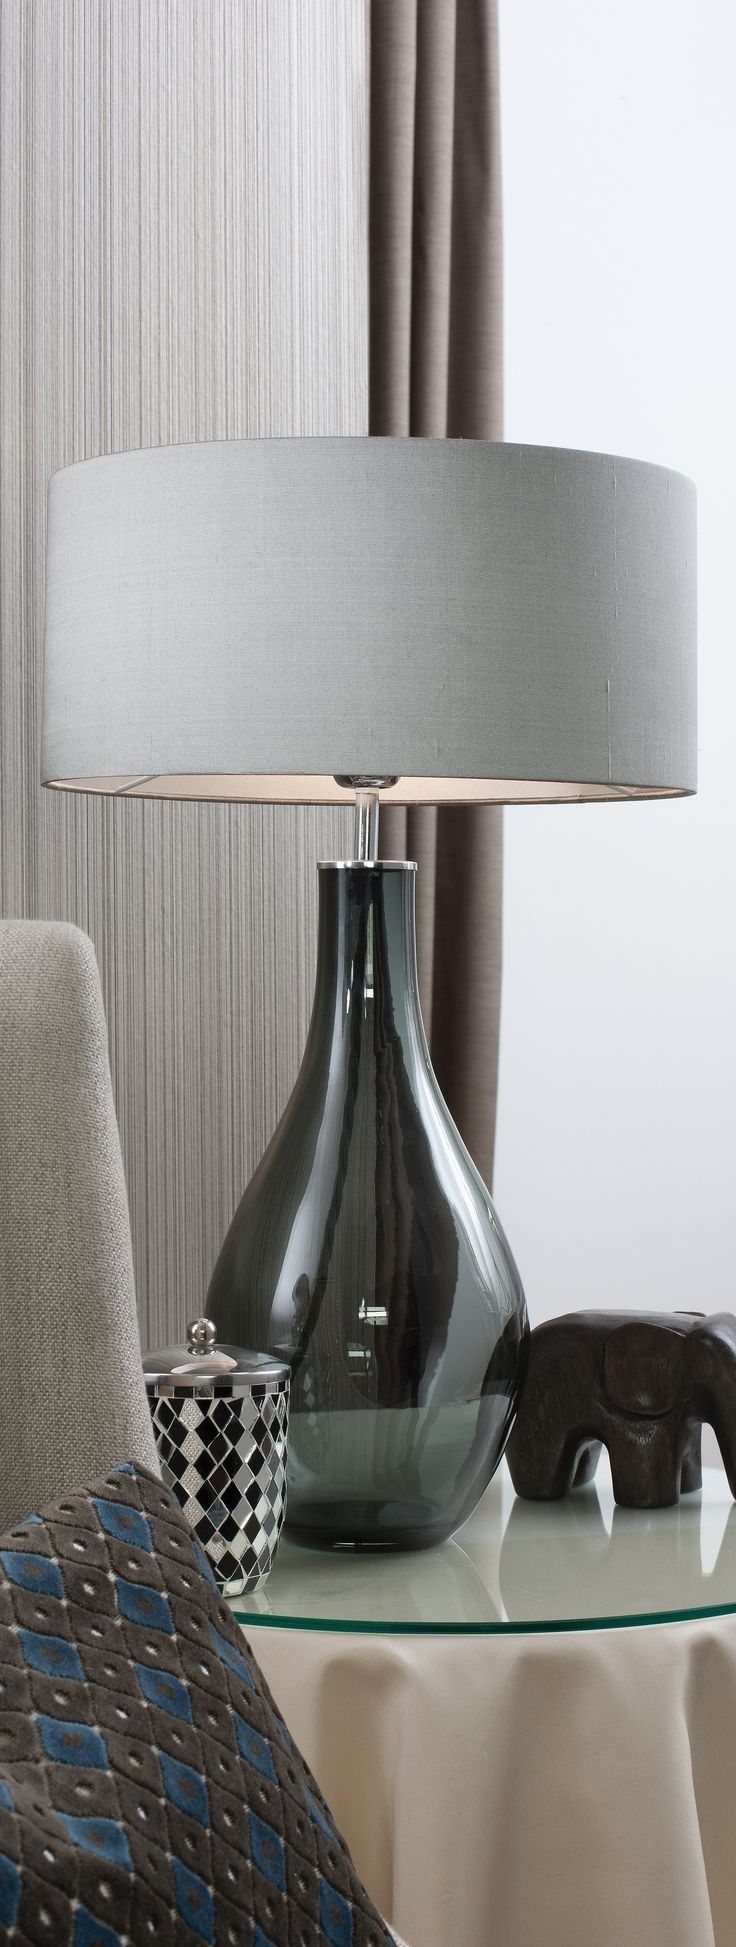 121 Best 台灯 Images On Pinterest | Table Lamps, Light Table And With Luxury Living Room Table Lamps (View 11 of 15)